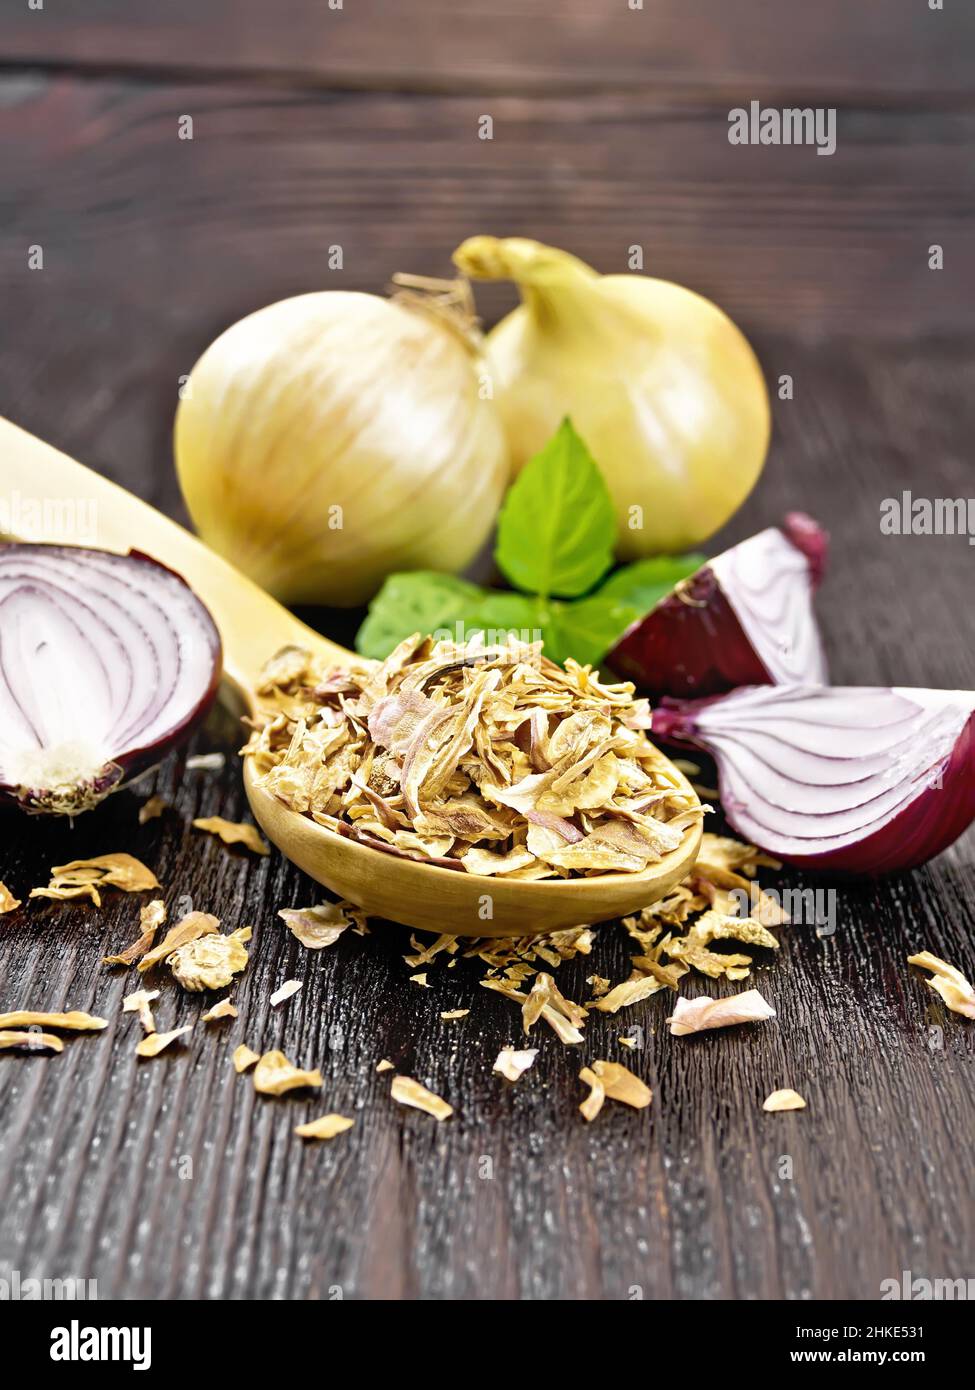 Dried onion flakes in a spoon, purple and yellow onions, basil on wooden board background Stock Photo